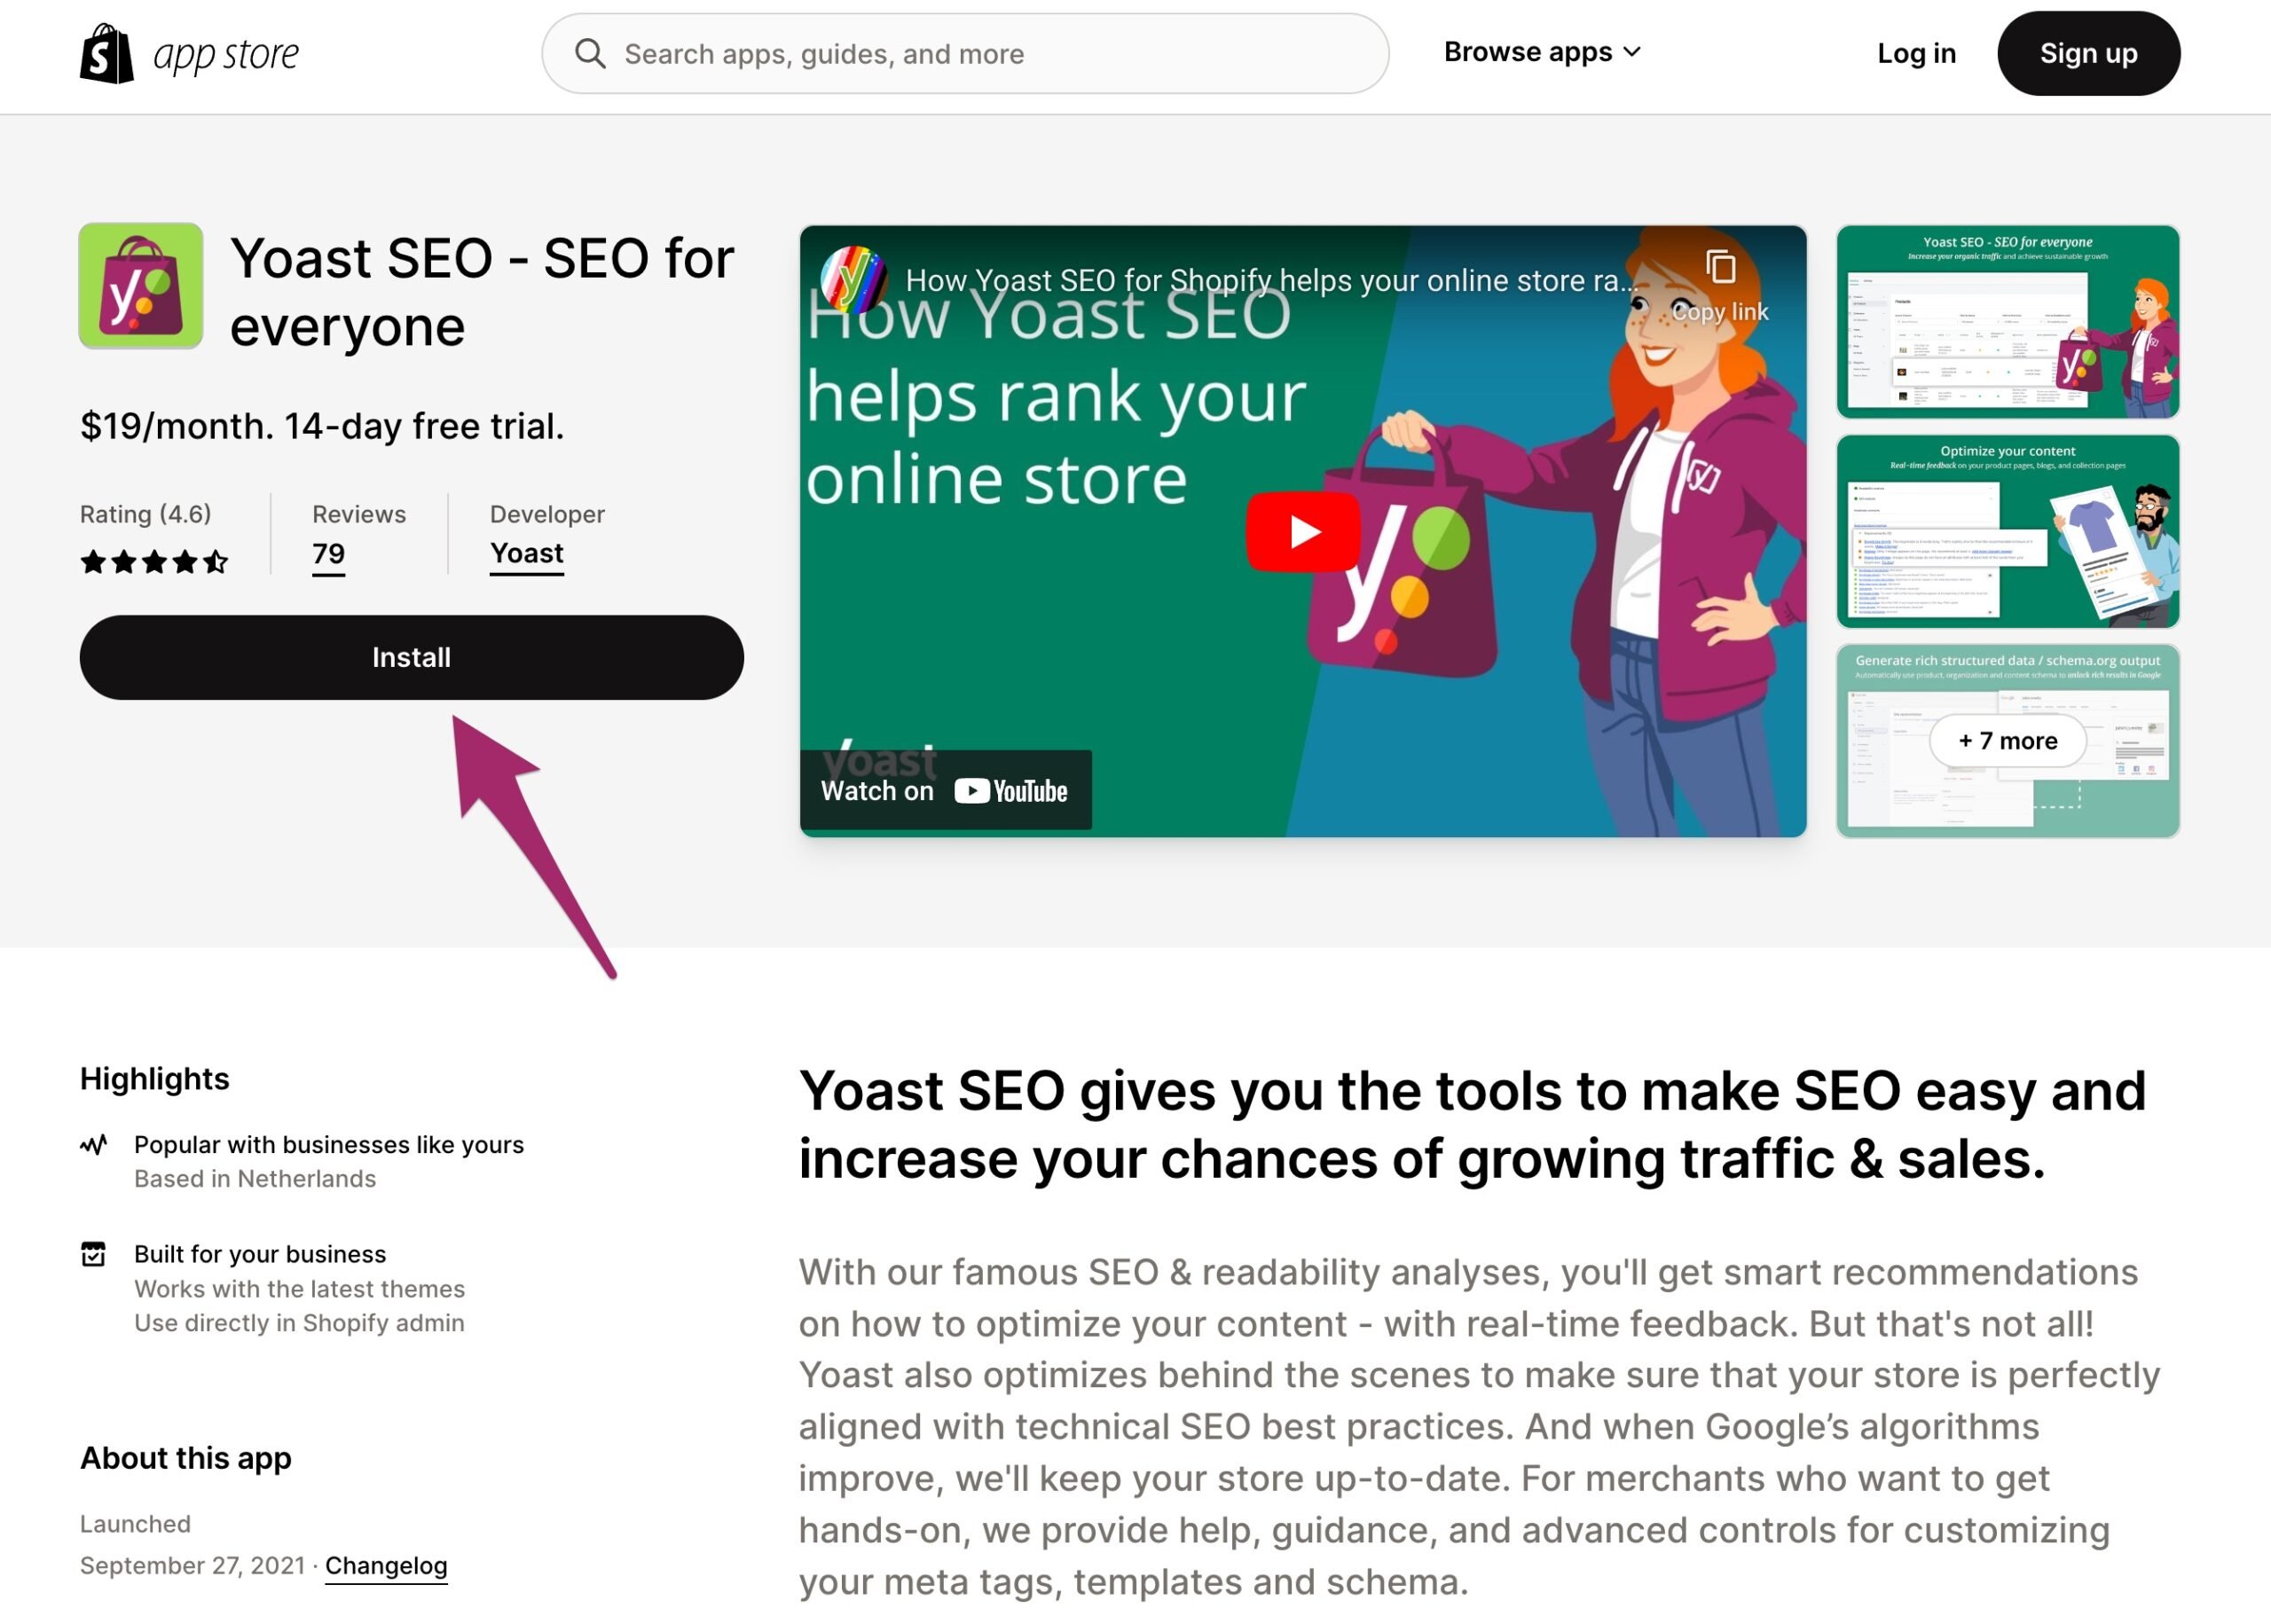 Screenshot of the Yoast SEO app page in the Shopify App Store